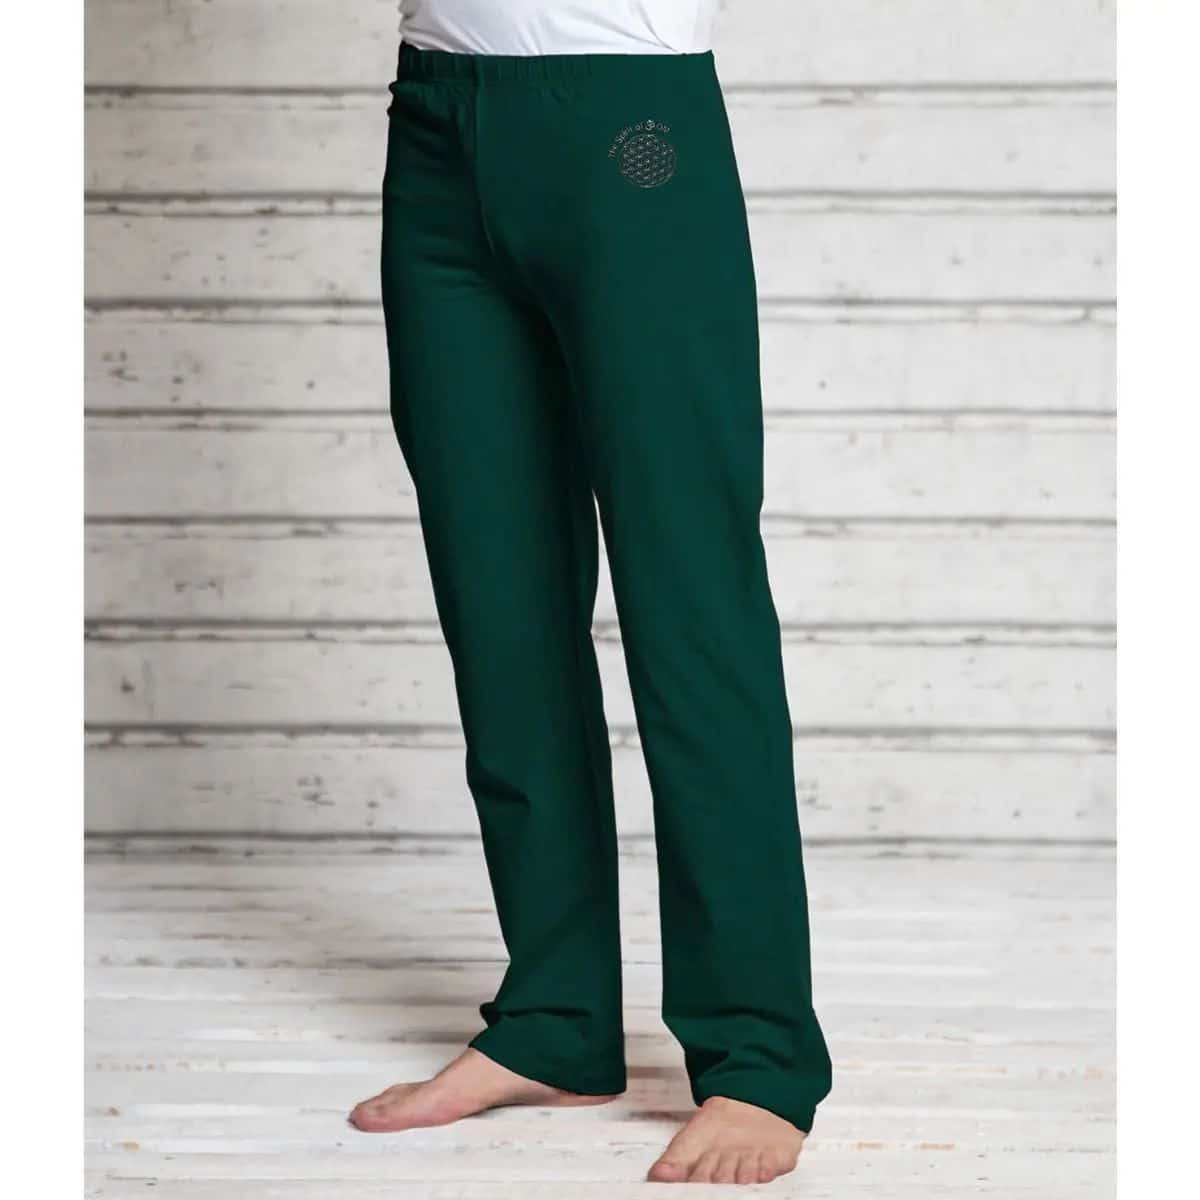 Yoga pants for Men Forest Green organic cotton by YOGiiZA 